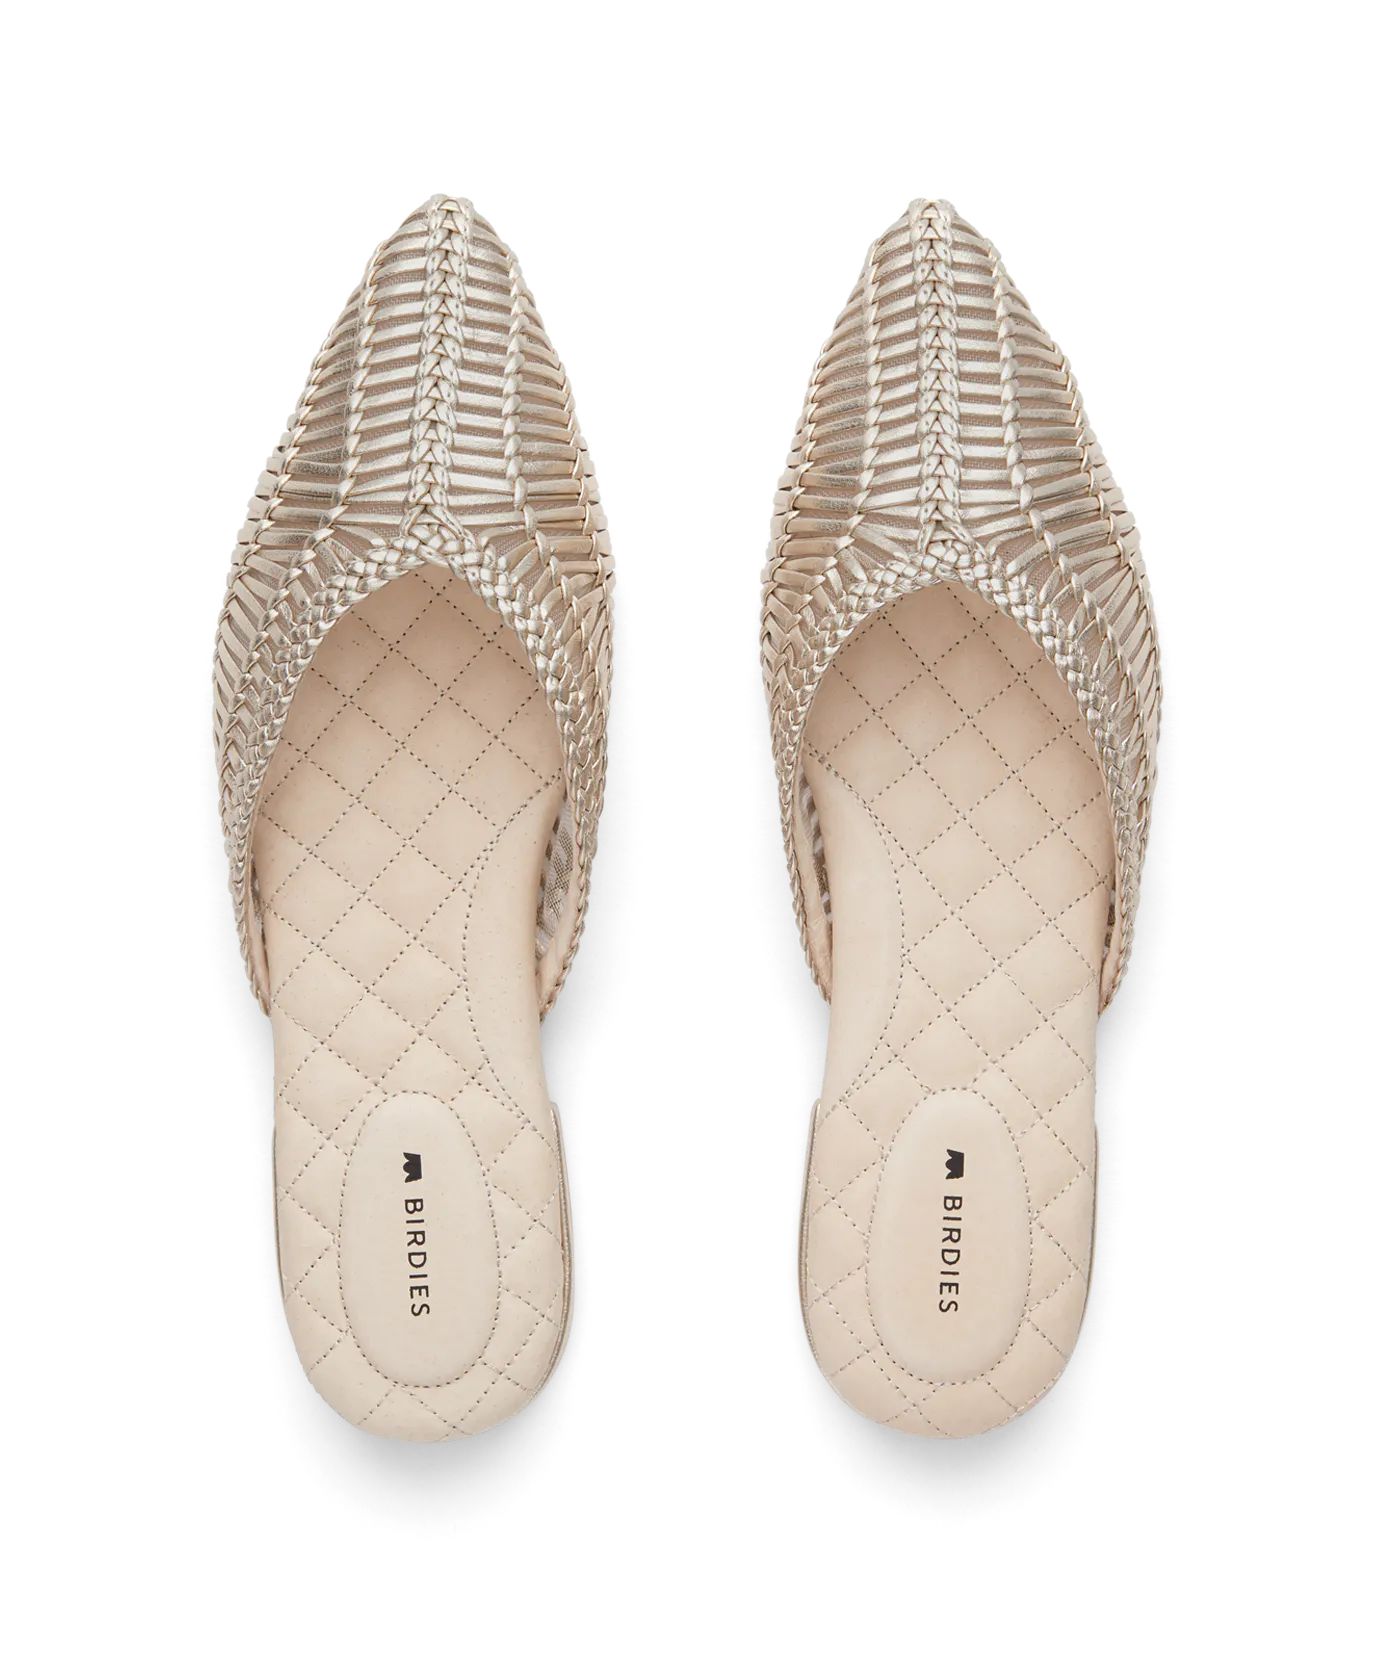 The Swan - Gold Woven Leather | BIRDIES